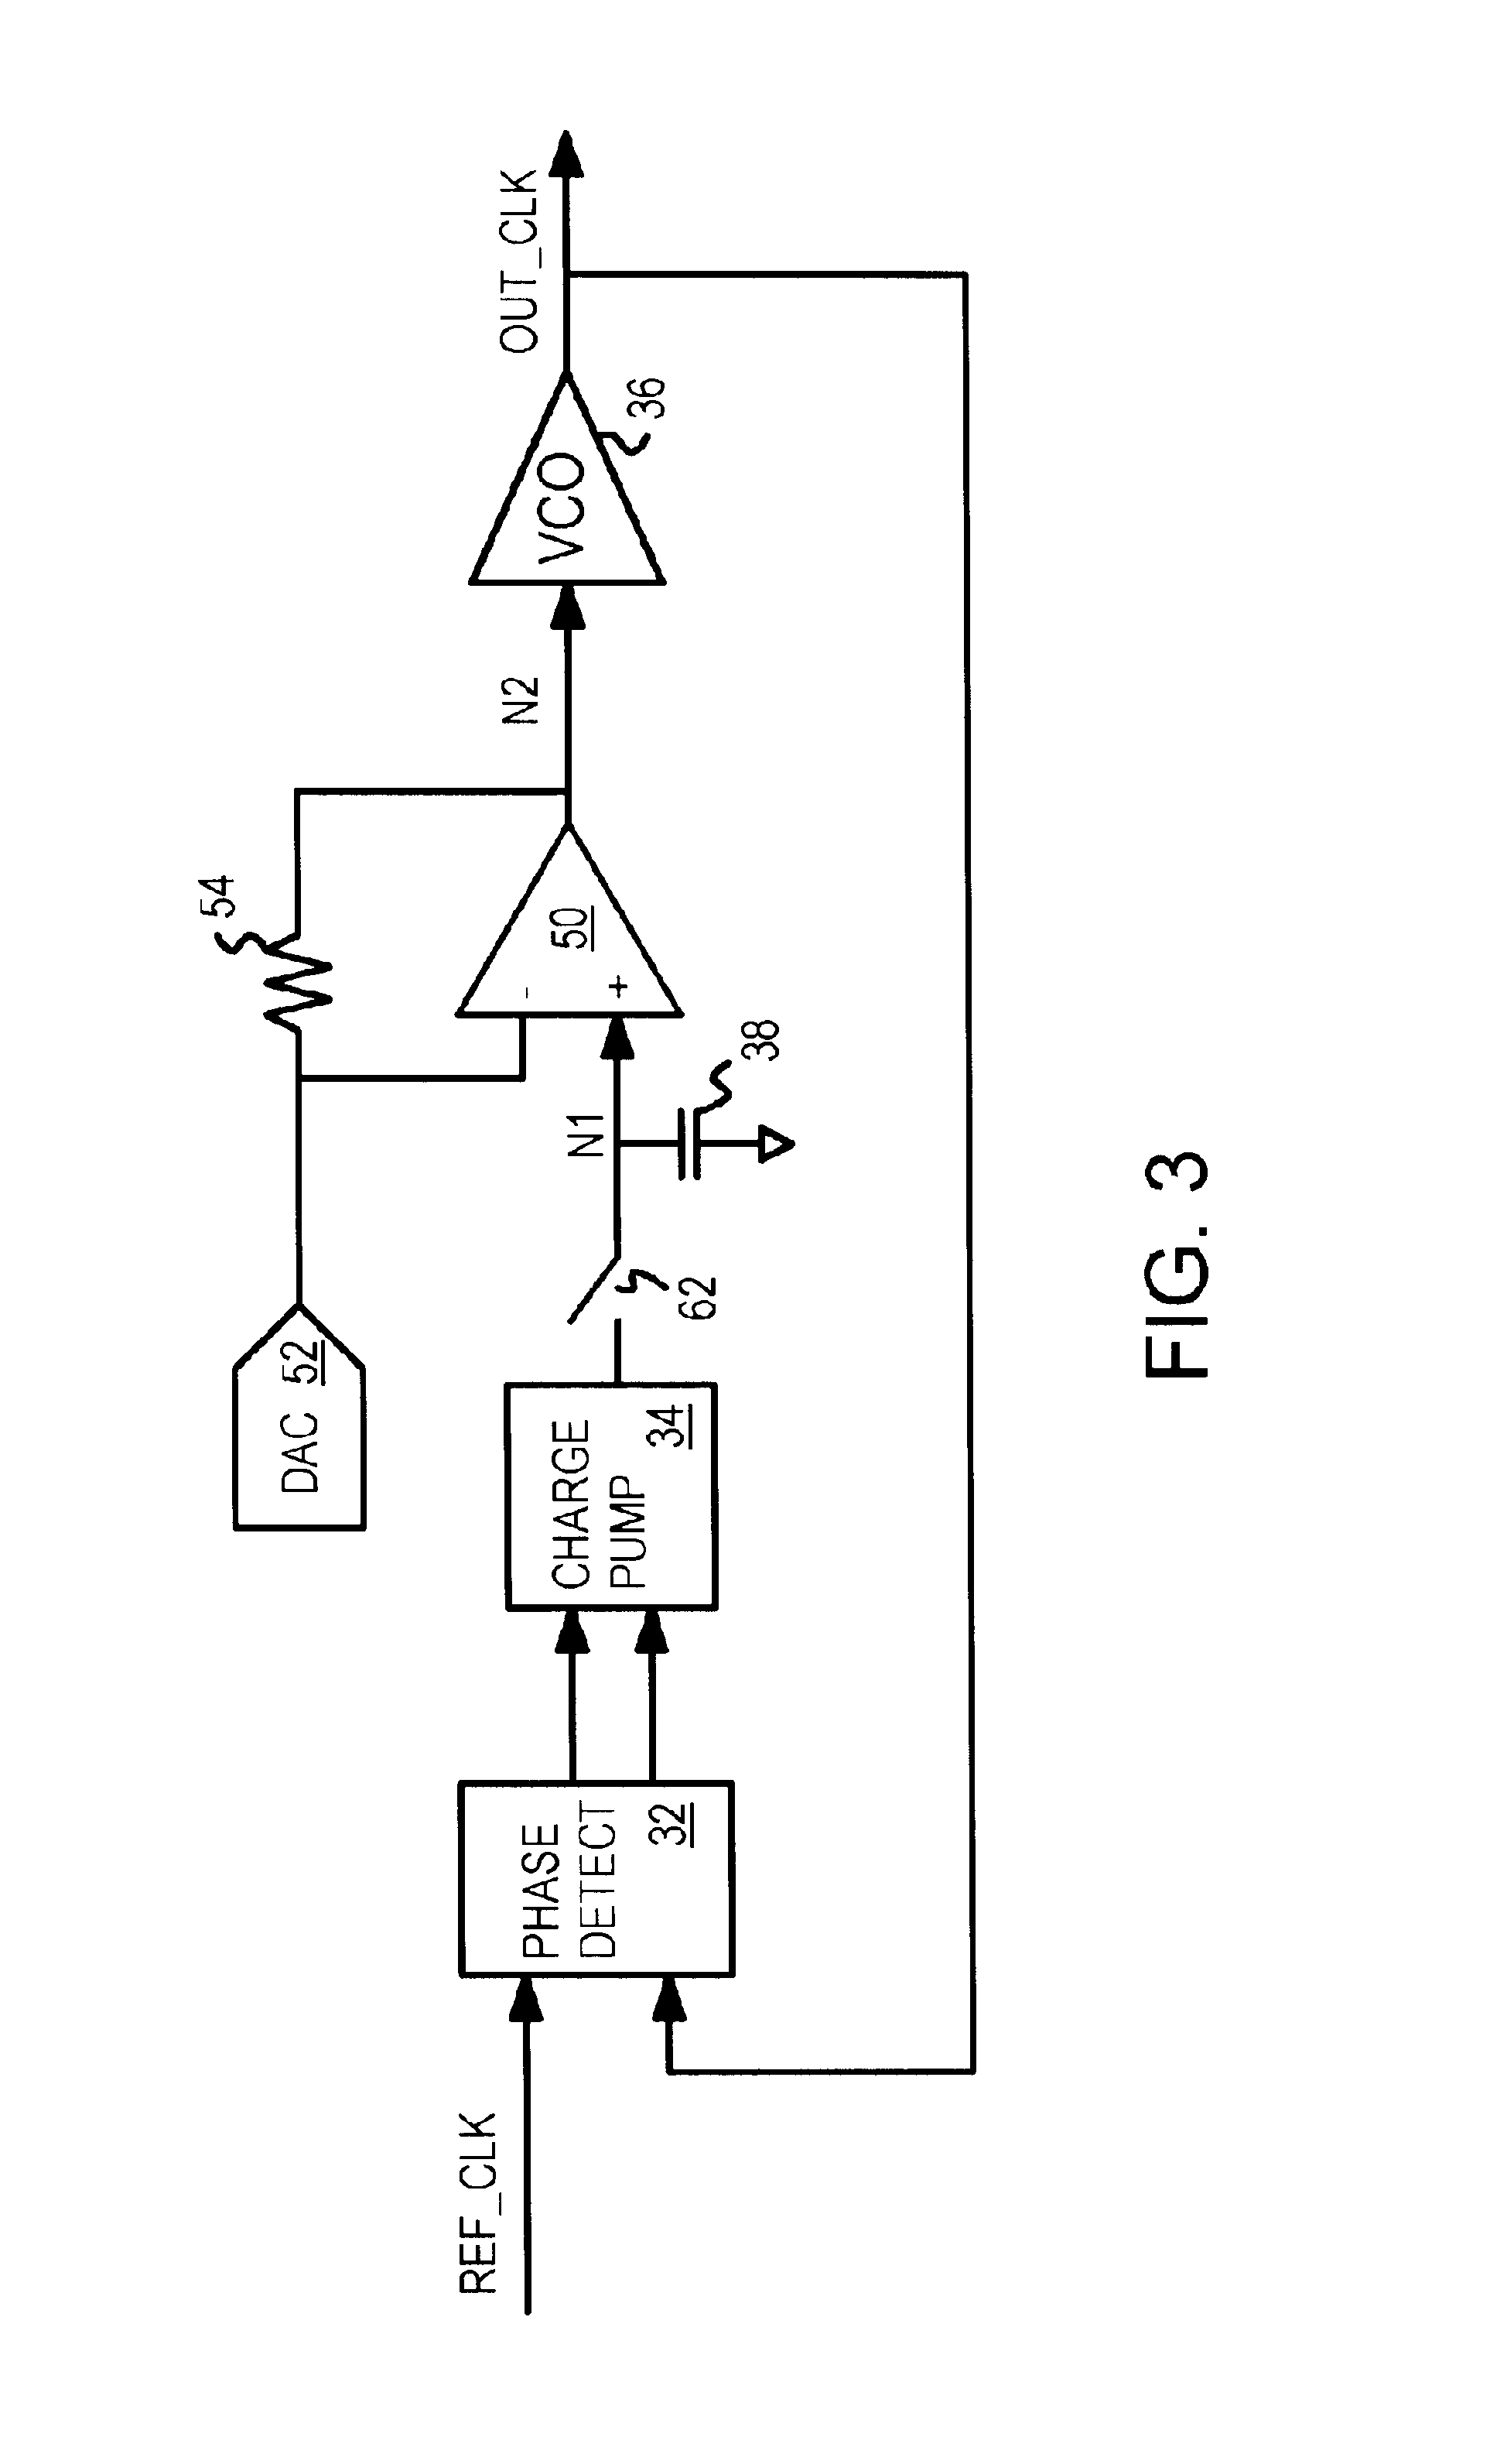 Dual-loop PLL with DAC offset for frequency shift while maintaining input tracking